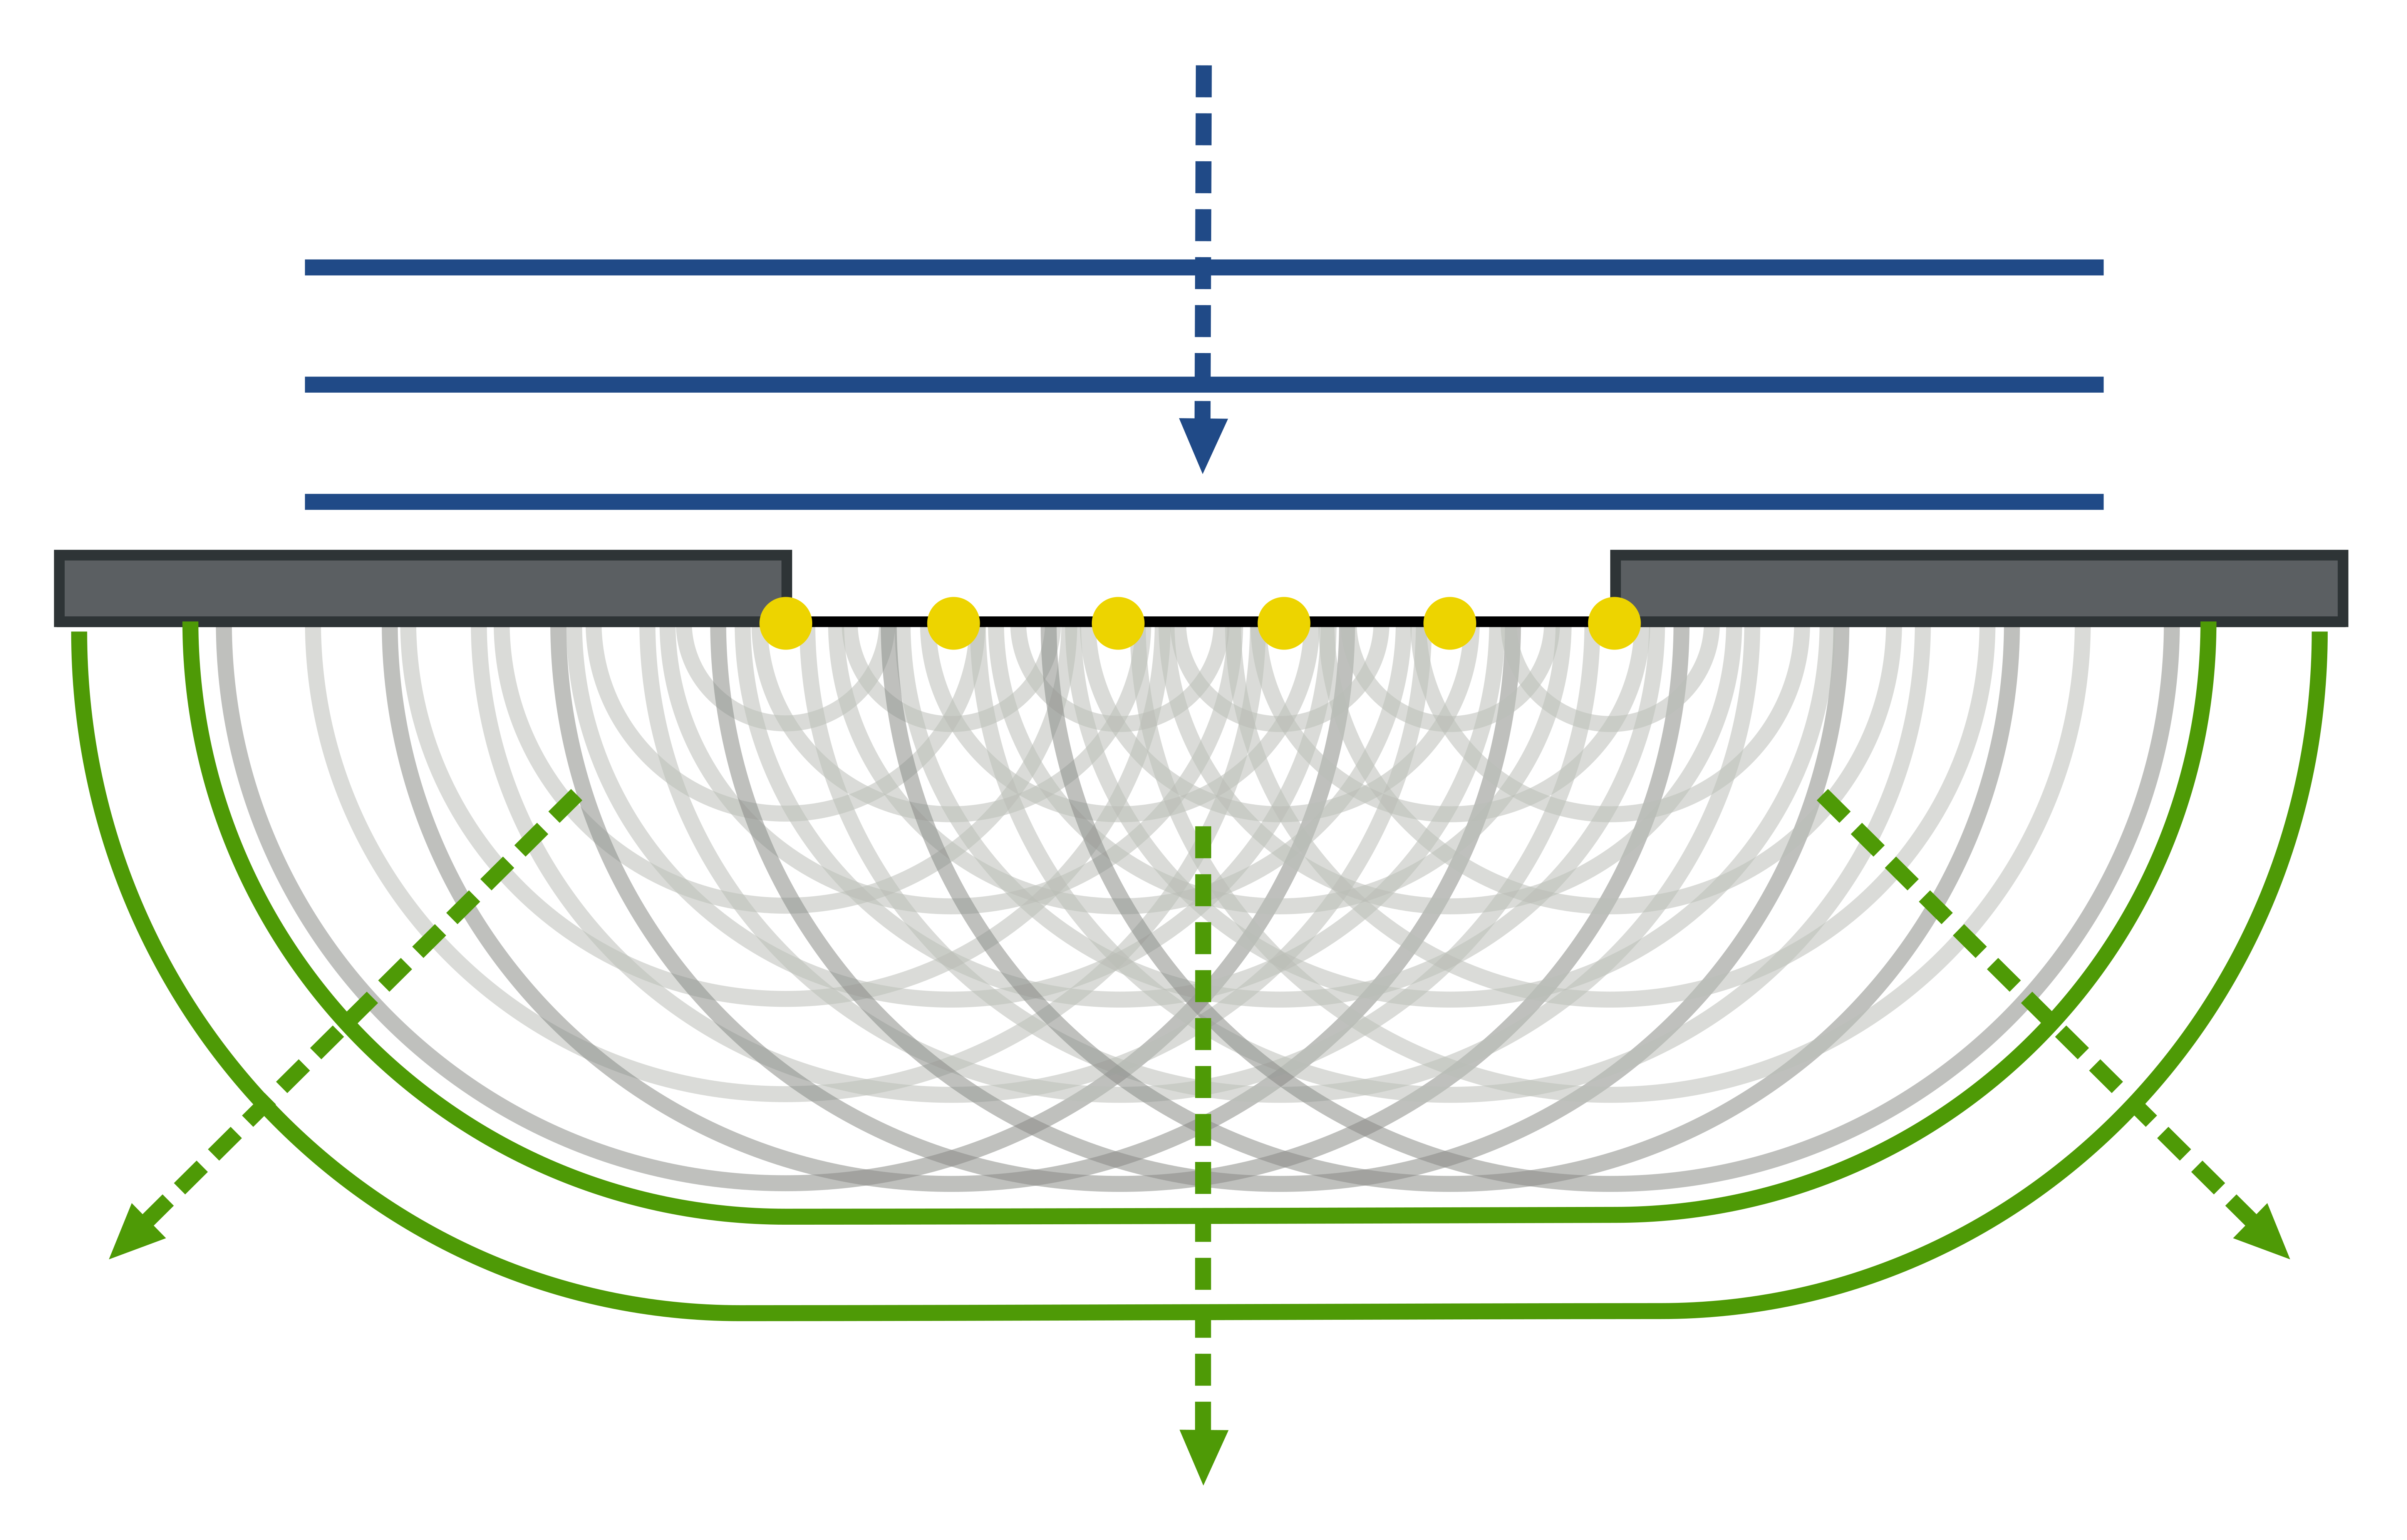 A graphical depiction of Huygens' principle for a plane wave traveling through a narrow opening. The interference of spherical waves creates a curved shape around the edges of the opening as the light passes through.